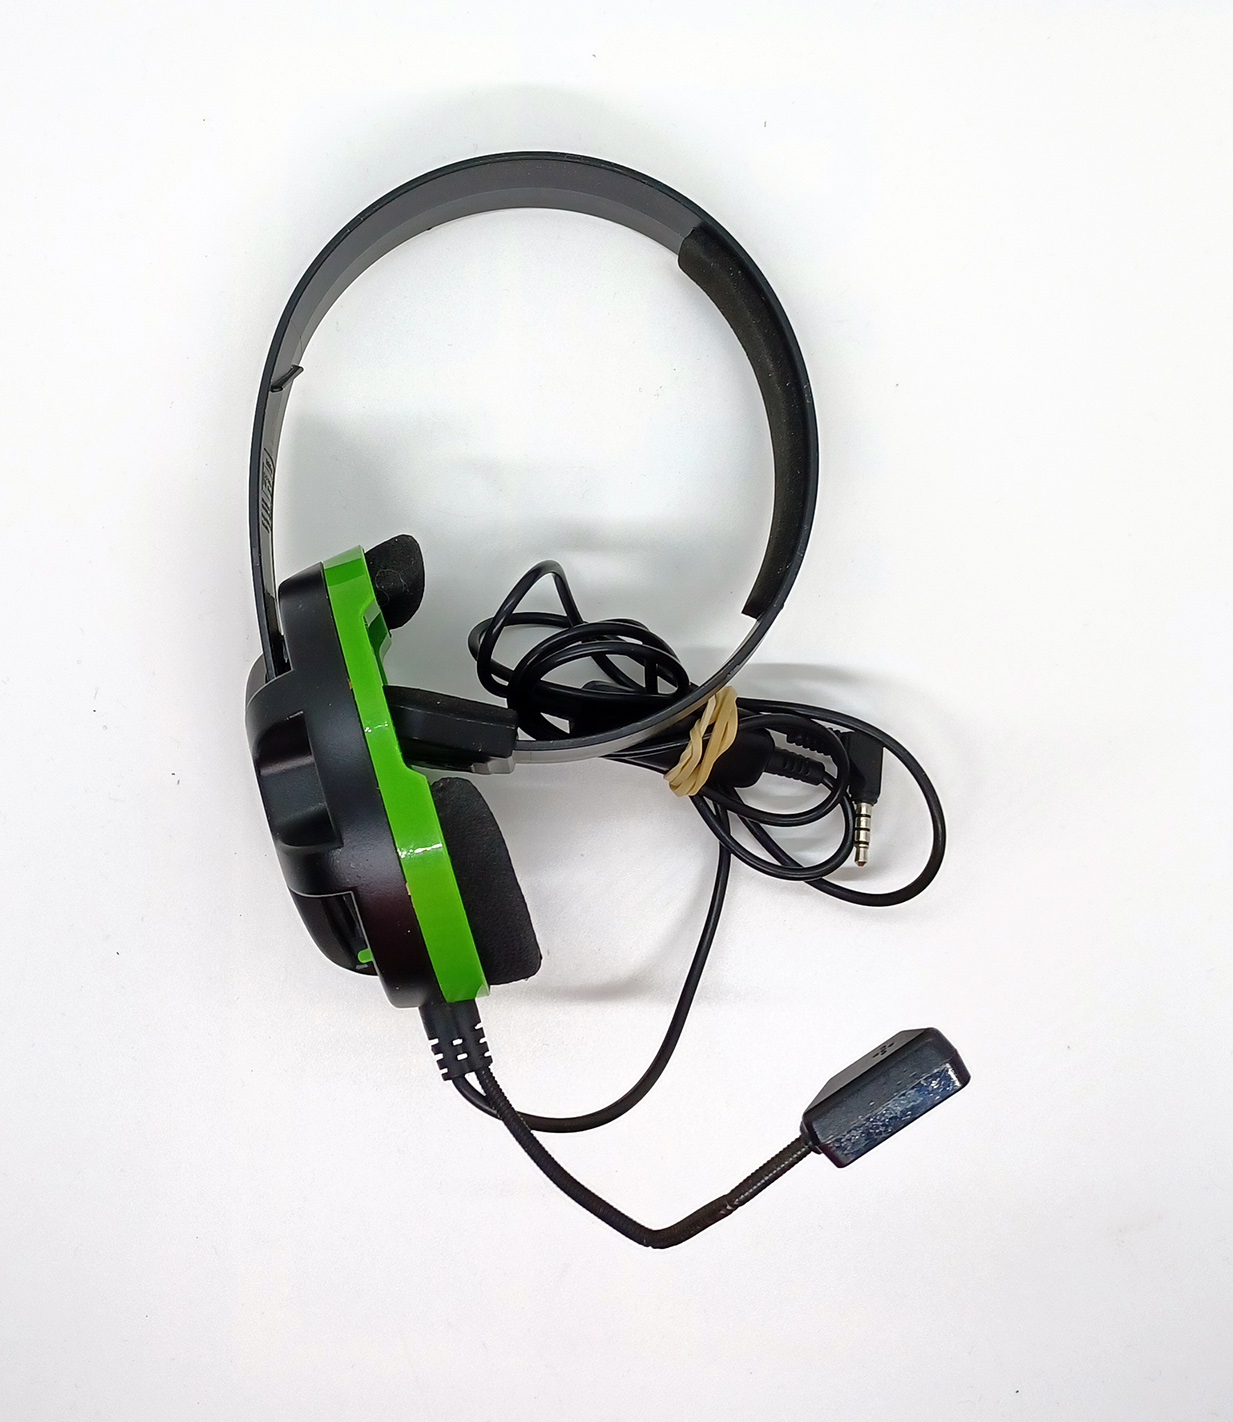 Casque XBox One Turtle Beach - Exclu web – Matos and Games